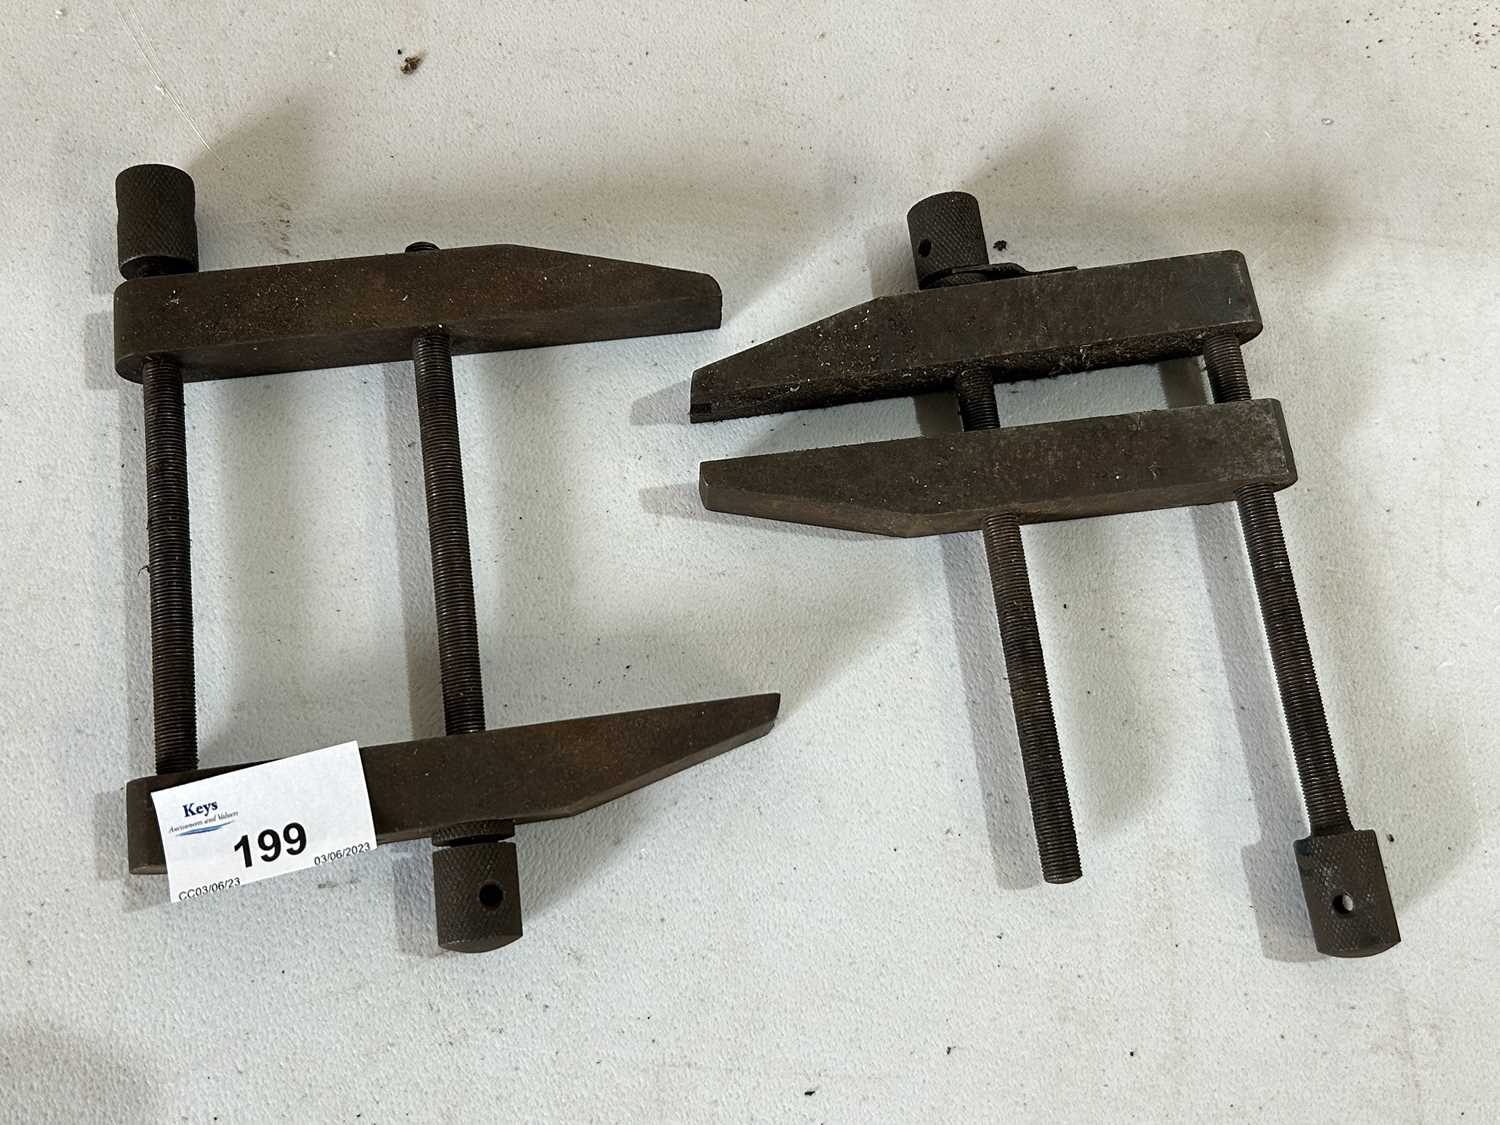 A pair of calipers